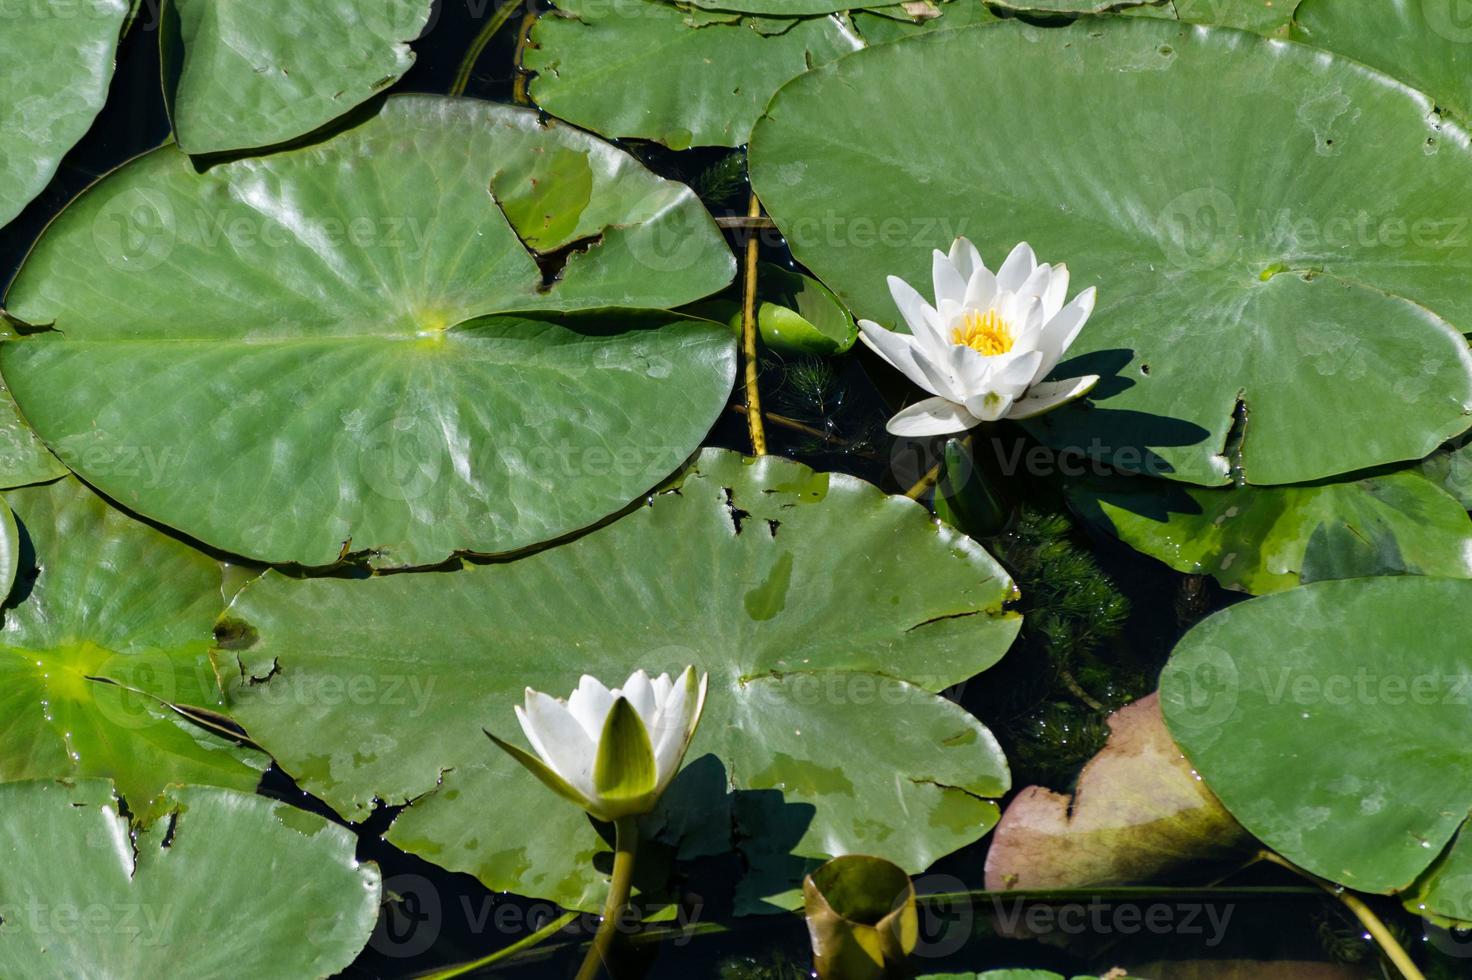 Water lily flower in river. National symbol of Bangladesh. Beautiful white lotus with yellow pollen. photo